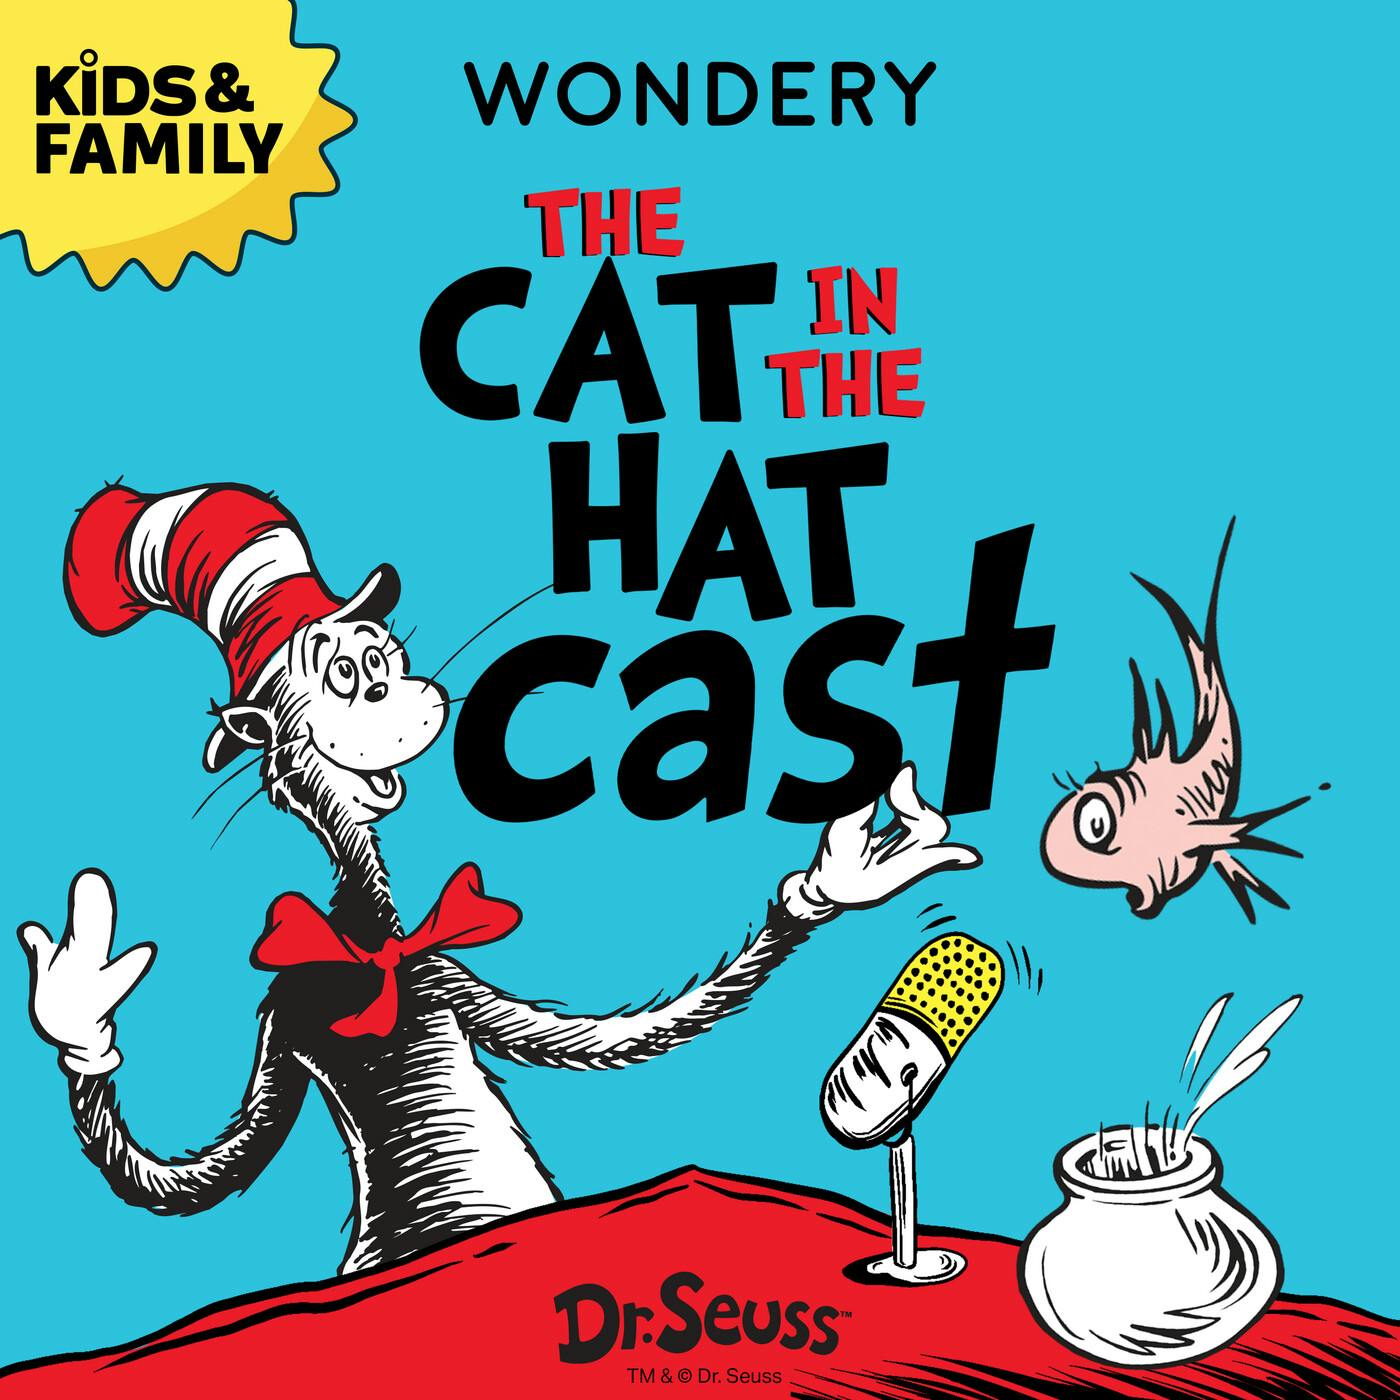 Listen Now: The Cat in the Hat Cast